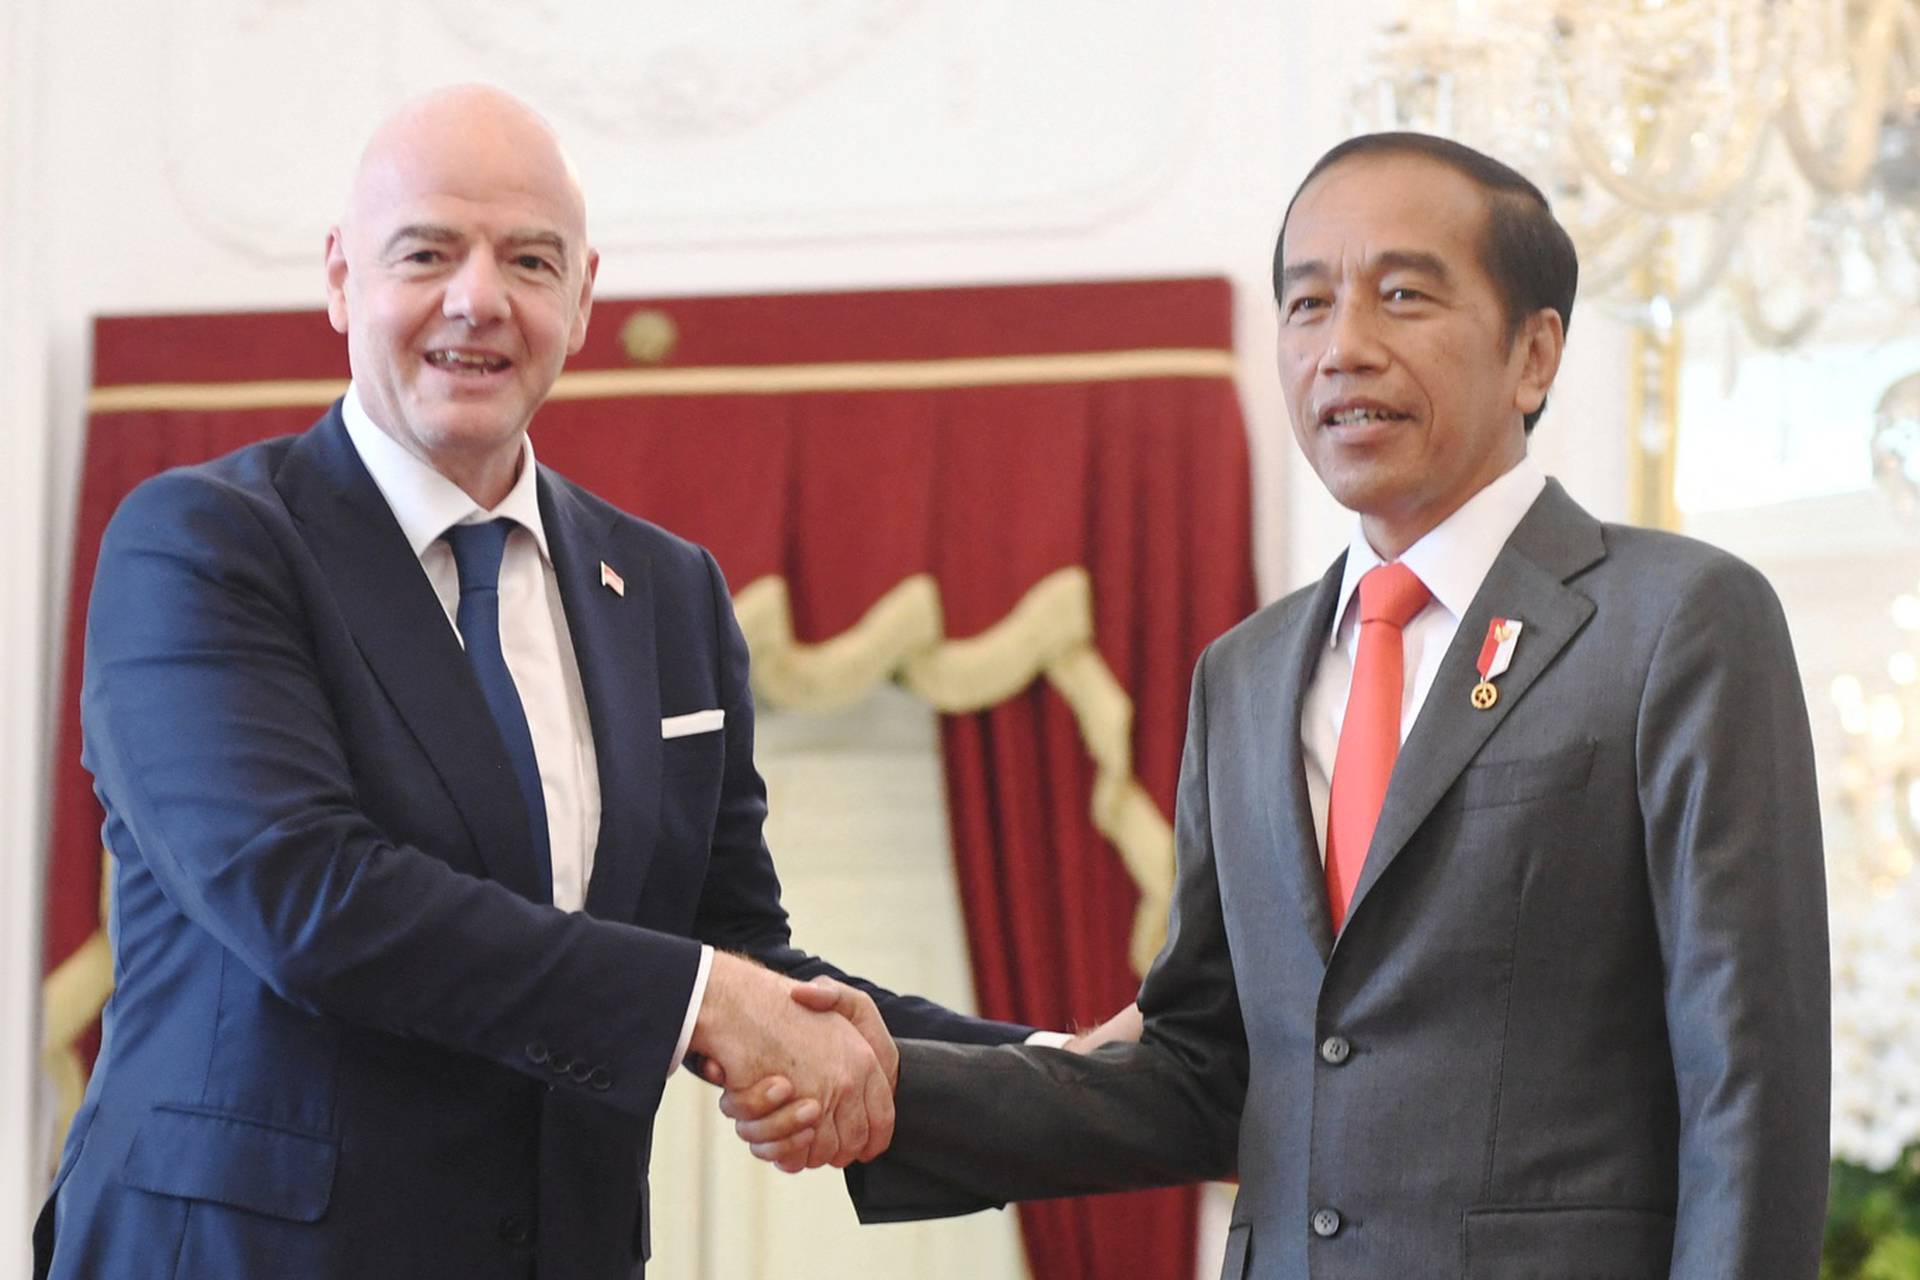 Indonesian President Joko Widodo shakes hands with FIFA’s president Gianni Infantino during their meeting at the Merdeka Palace in Jakarta